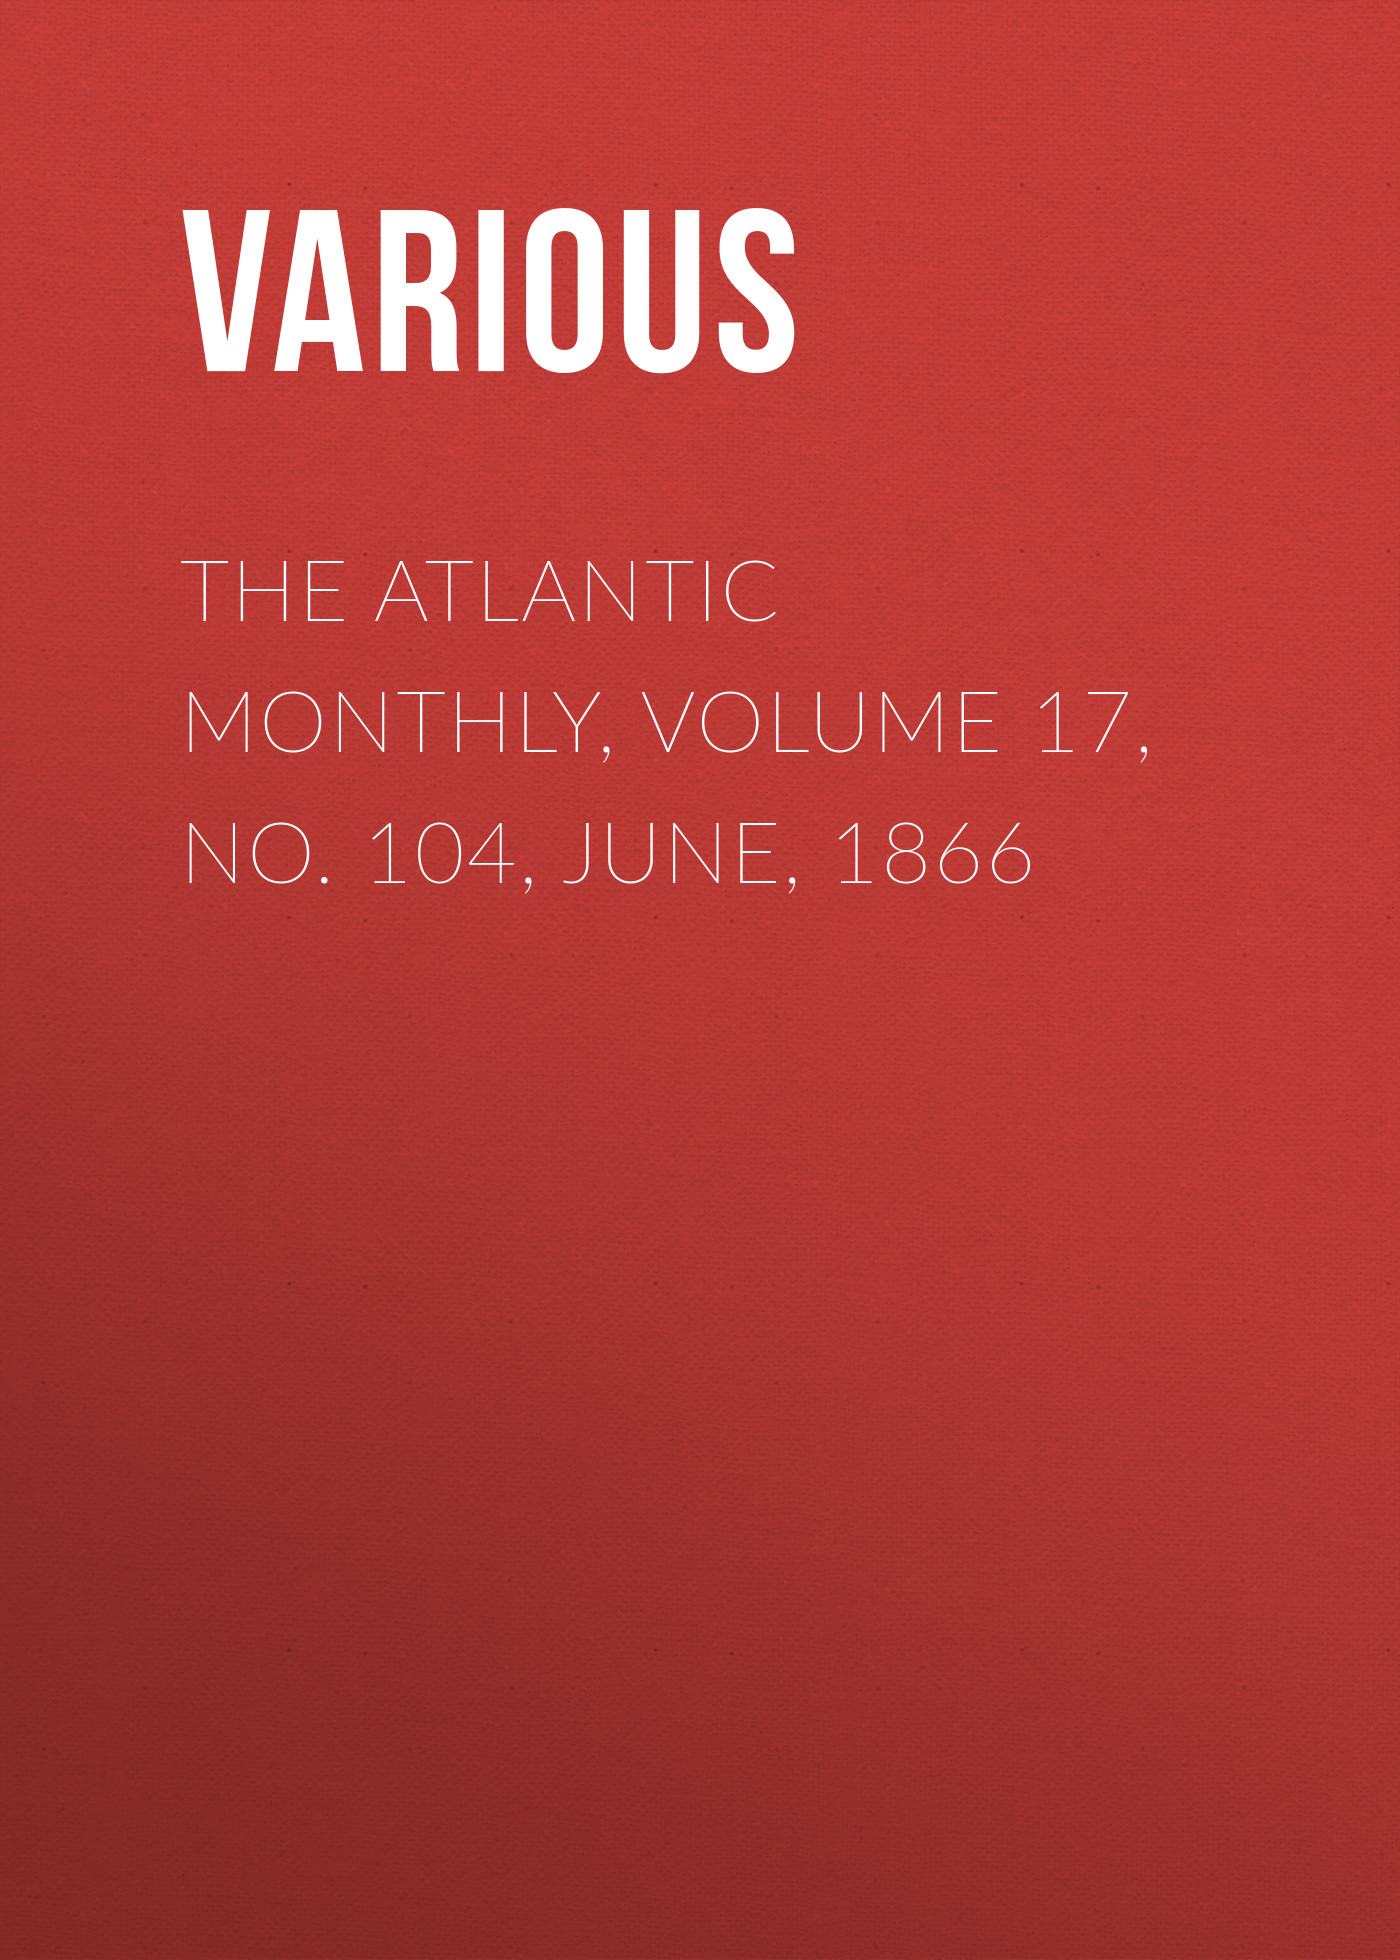 Various The Atlantic Monthly, Volume 17, No. 104, June, 1866